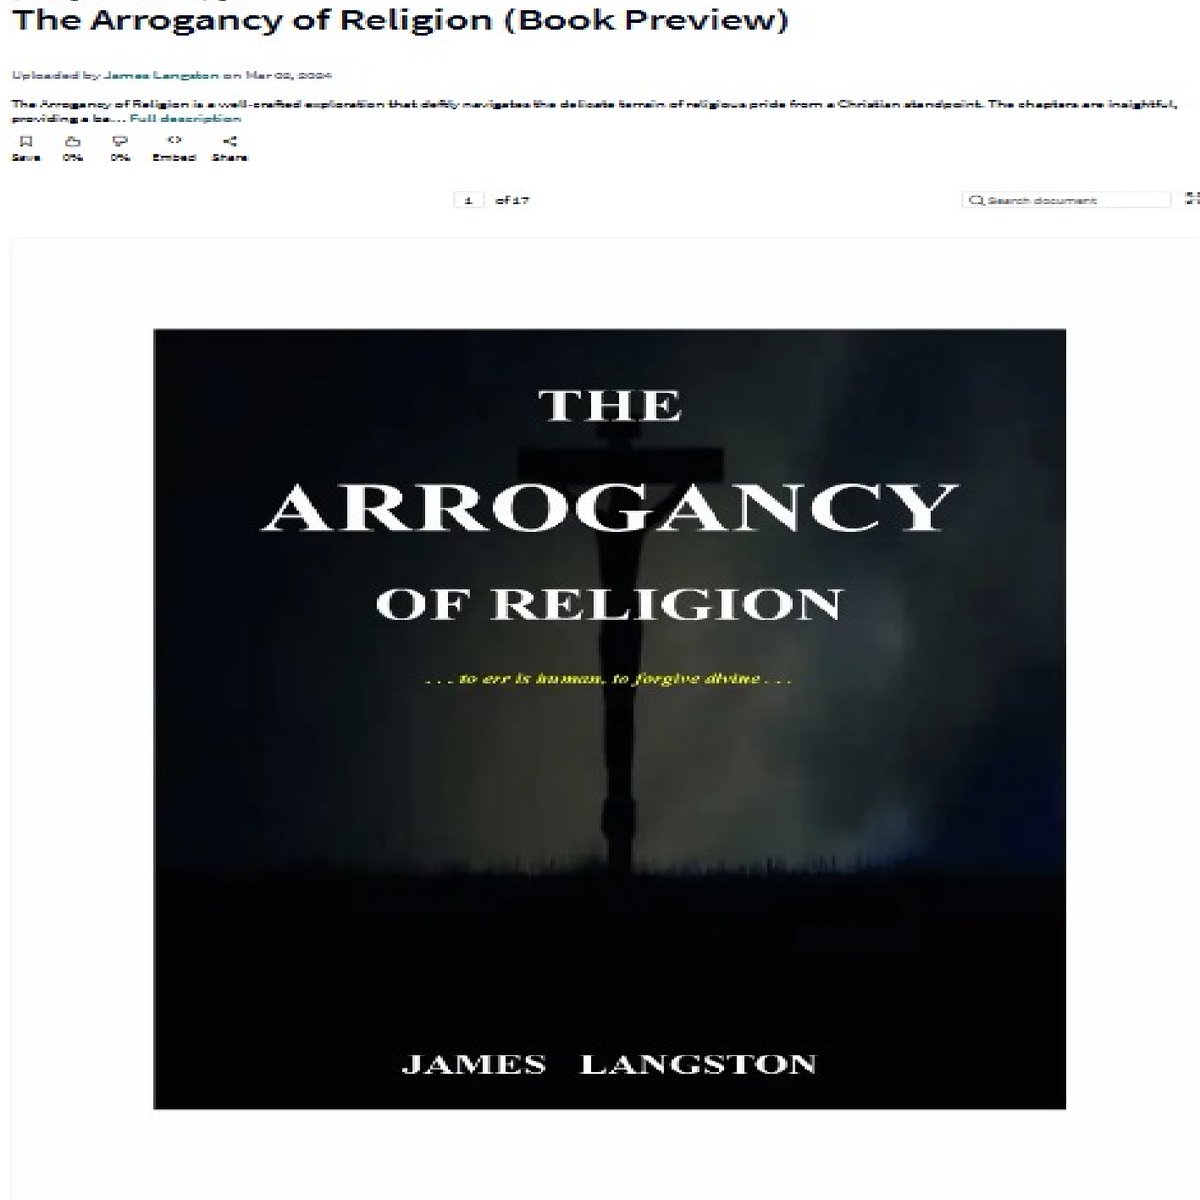 Get Ready to Explore 'The Arrogancy of Religion' [zurl.co/hrHE] in our captivating Book Trailer! Join author James Langston on a journey of introspection and understanding. Watch now! #BookTrailer #Religion #Christianity #Faith #Spirituality